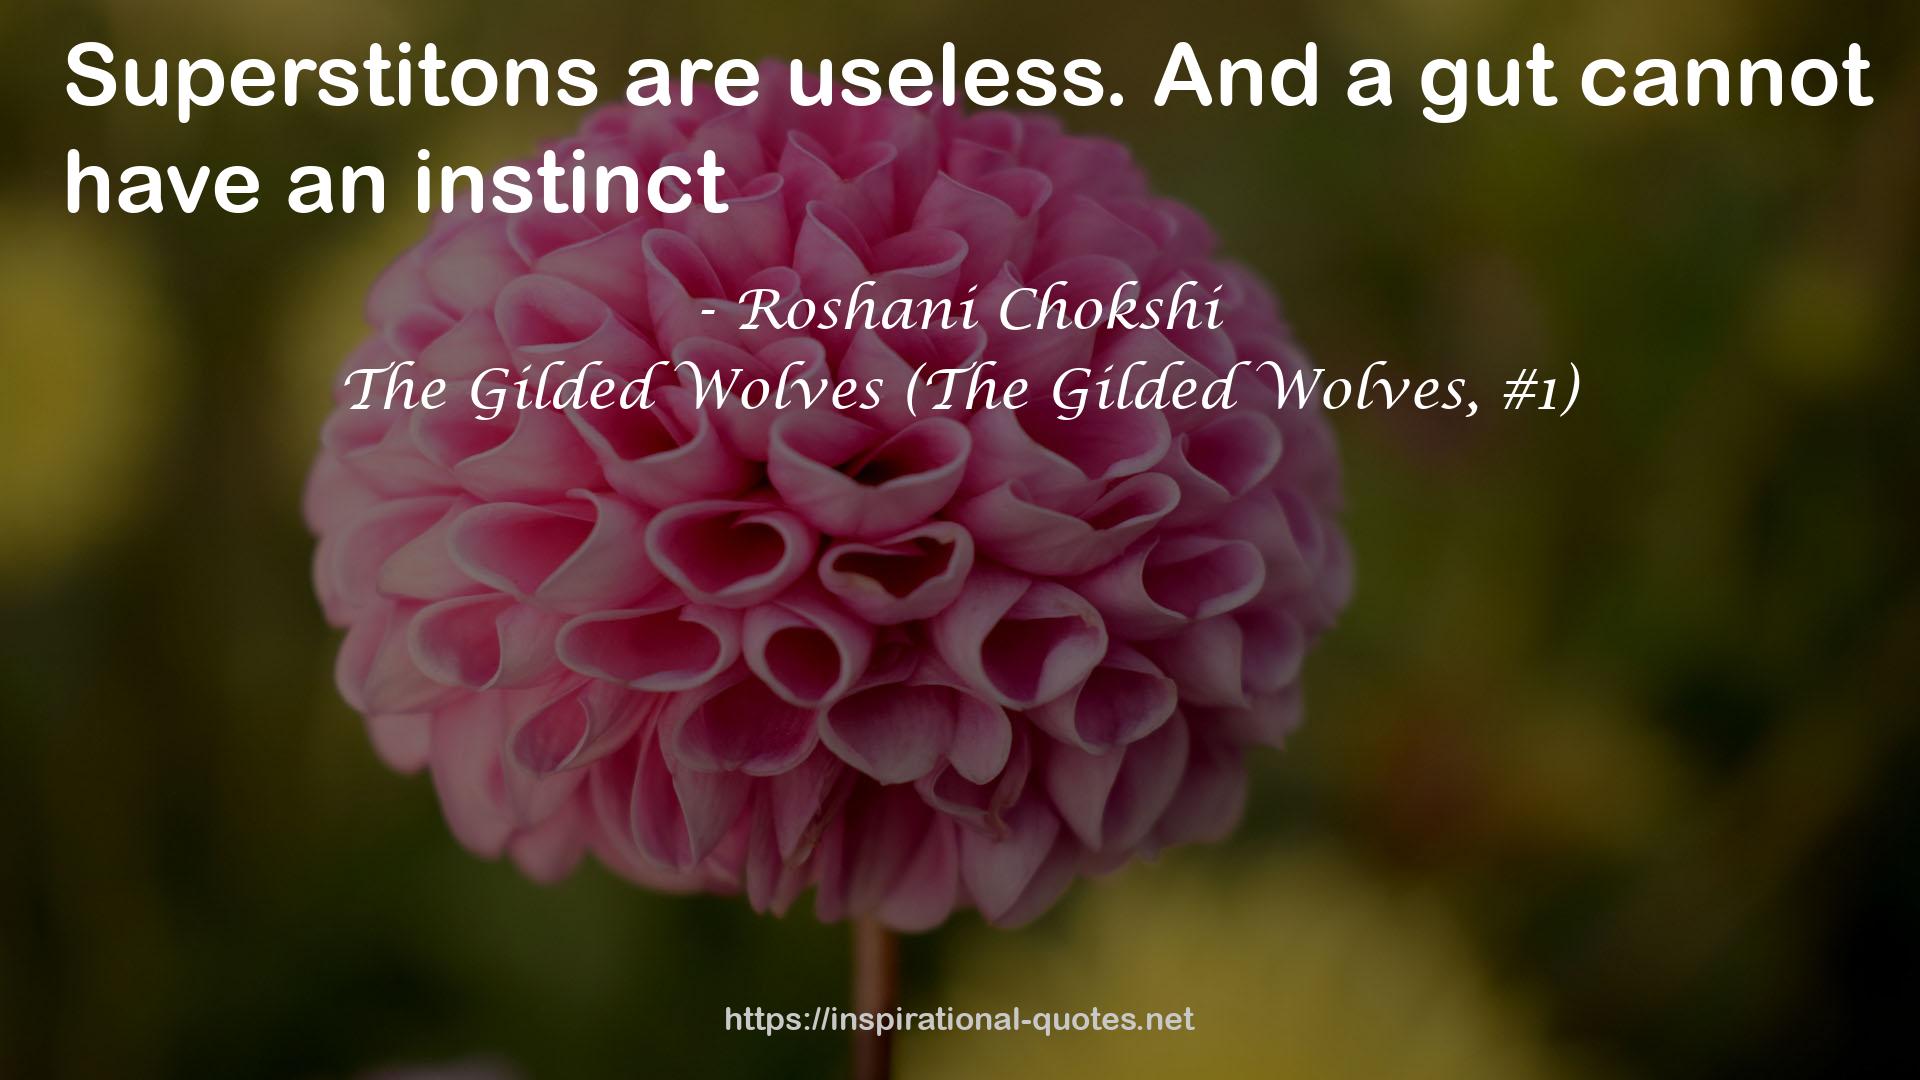 The Gilded Wolves (The Gilded Wolves, #1) QUOTES